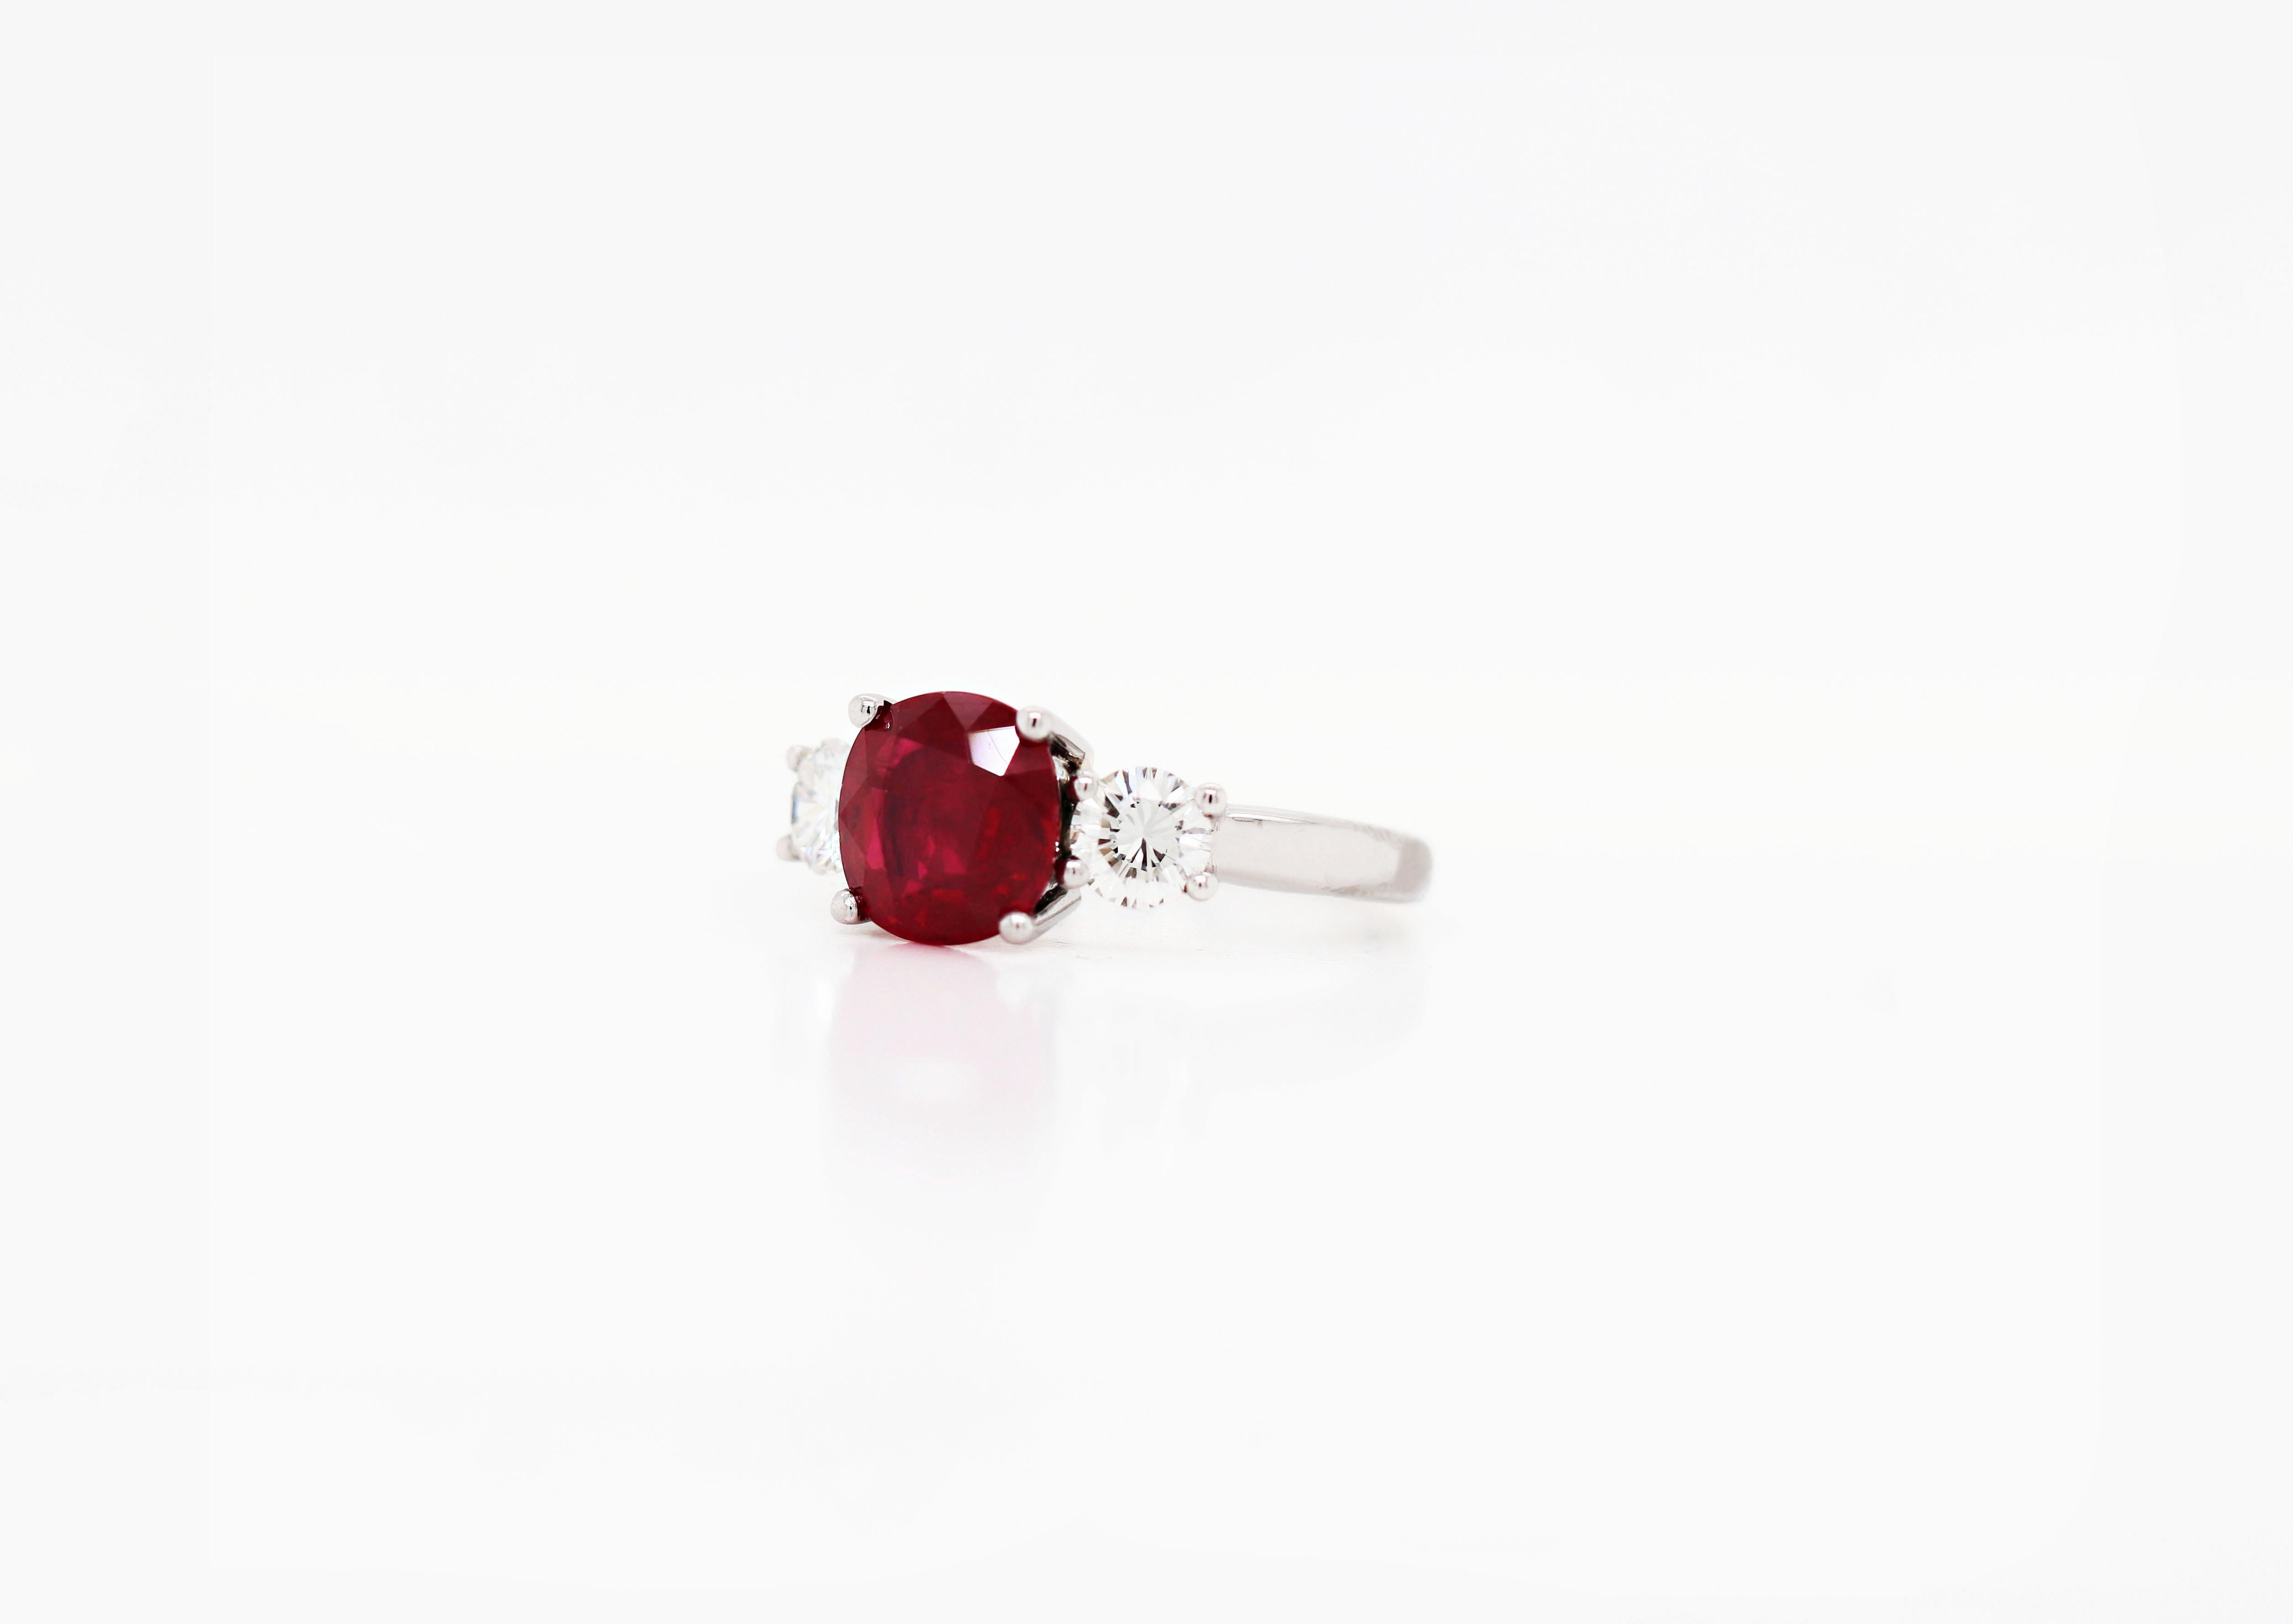 This beautiful three stone ring features a rich red cushion cut ruby weighing 2.58ct in a four claw open back setting. The vibrant stone is accompanied by two fine quality round brilliant cut diamonds weighing a combined weight of 0.72ct in four